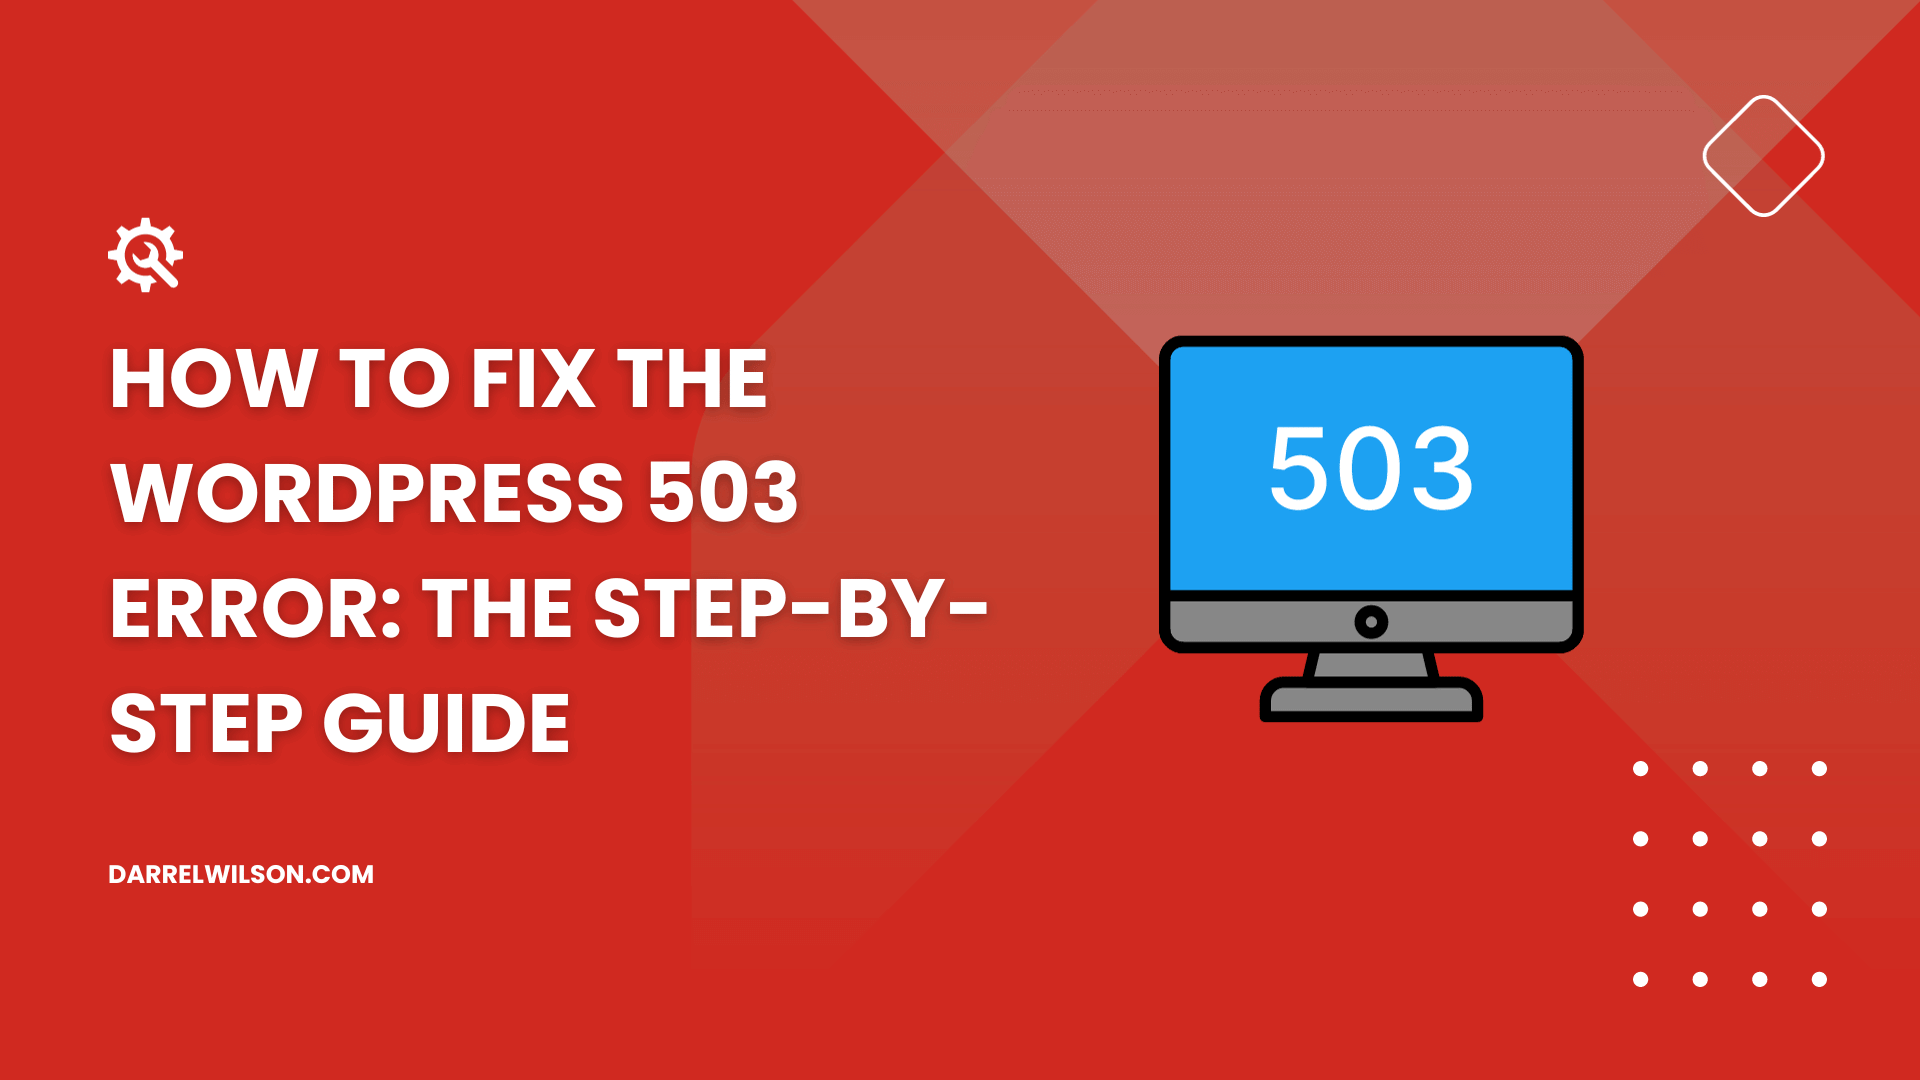 How to Fix the WordPress 503 Error: The Step-By-Step Guide